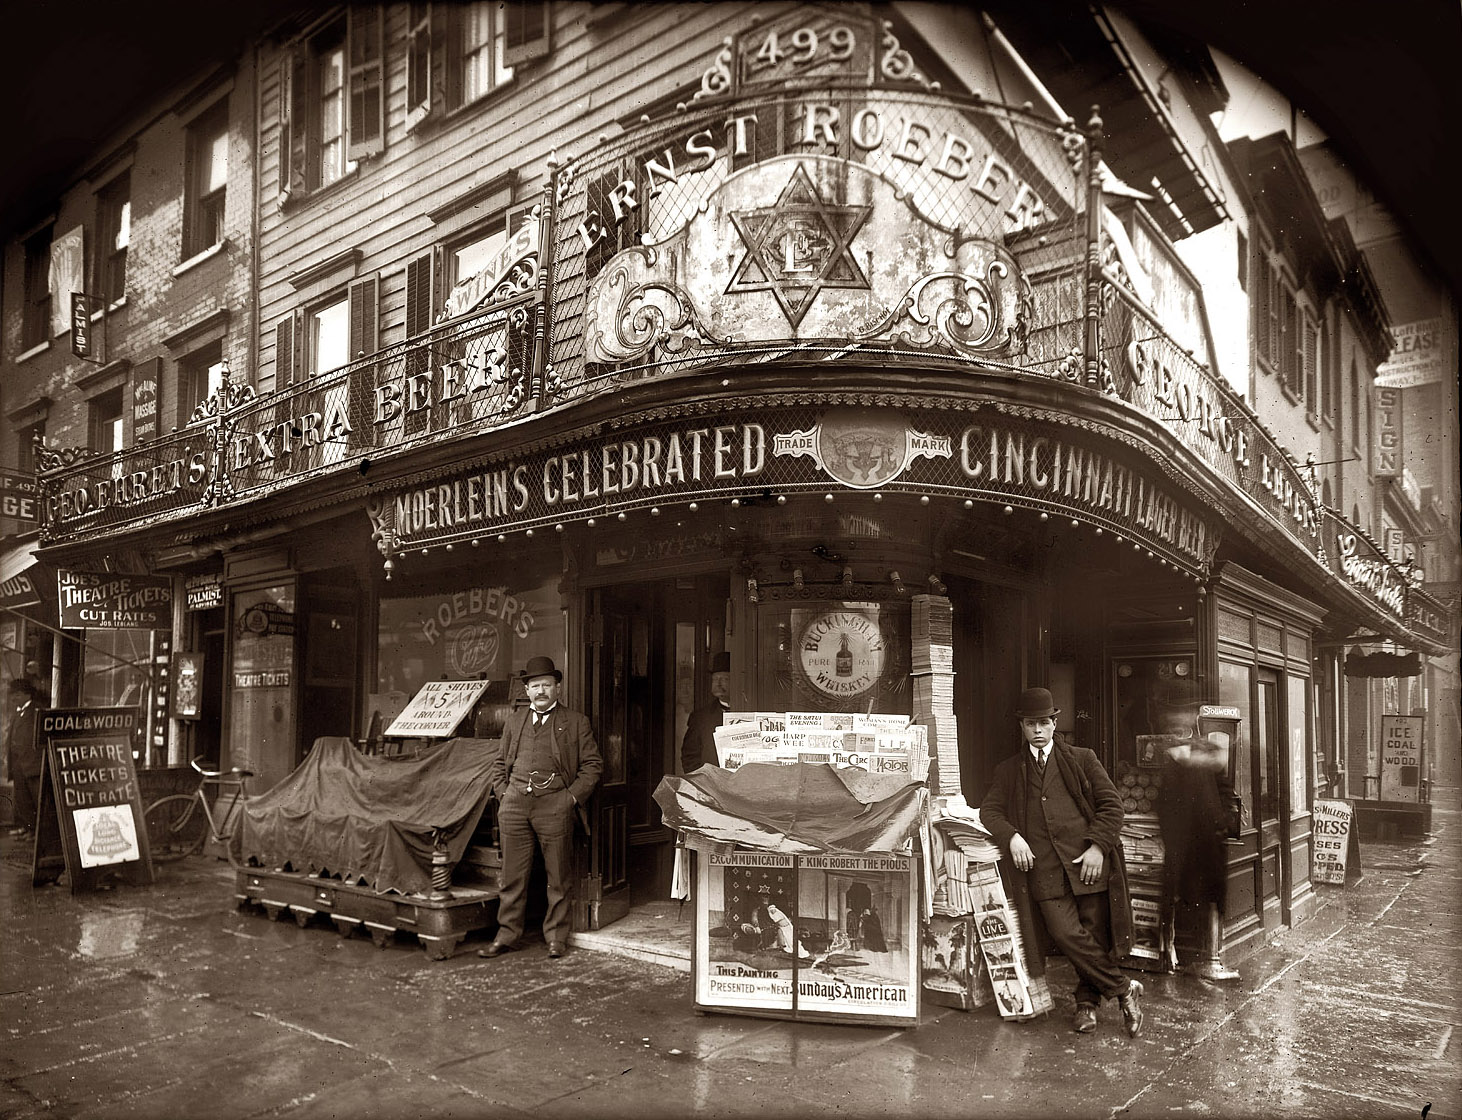 On the left, champion wrestler and vaudeville impresario Ernst Roeber (1861-1944) and his Manhattan saloon at 499 Sixth Avenue around Easter 1908. 8x10 glass negative, George Grantham Bain Collection. View full size. Roeber (aka Ernest or Ernie) also operated a cafe in the Ridgewood section of Brooklyn.